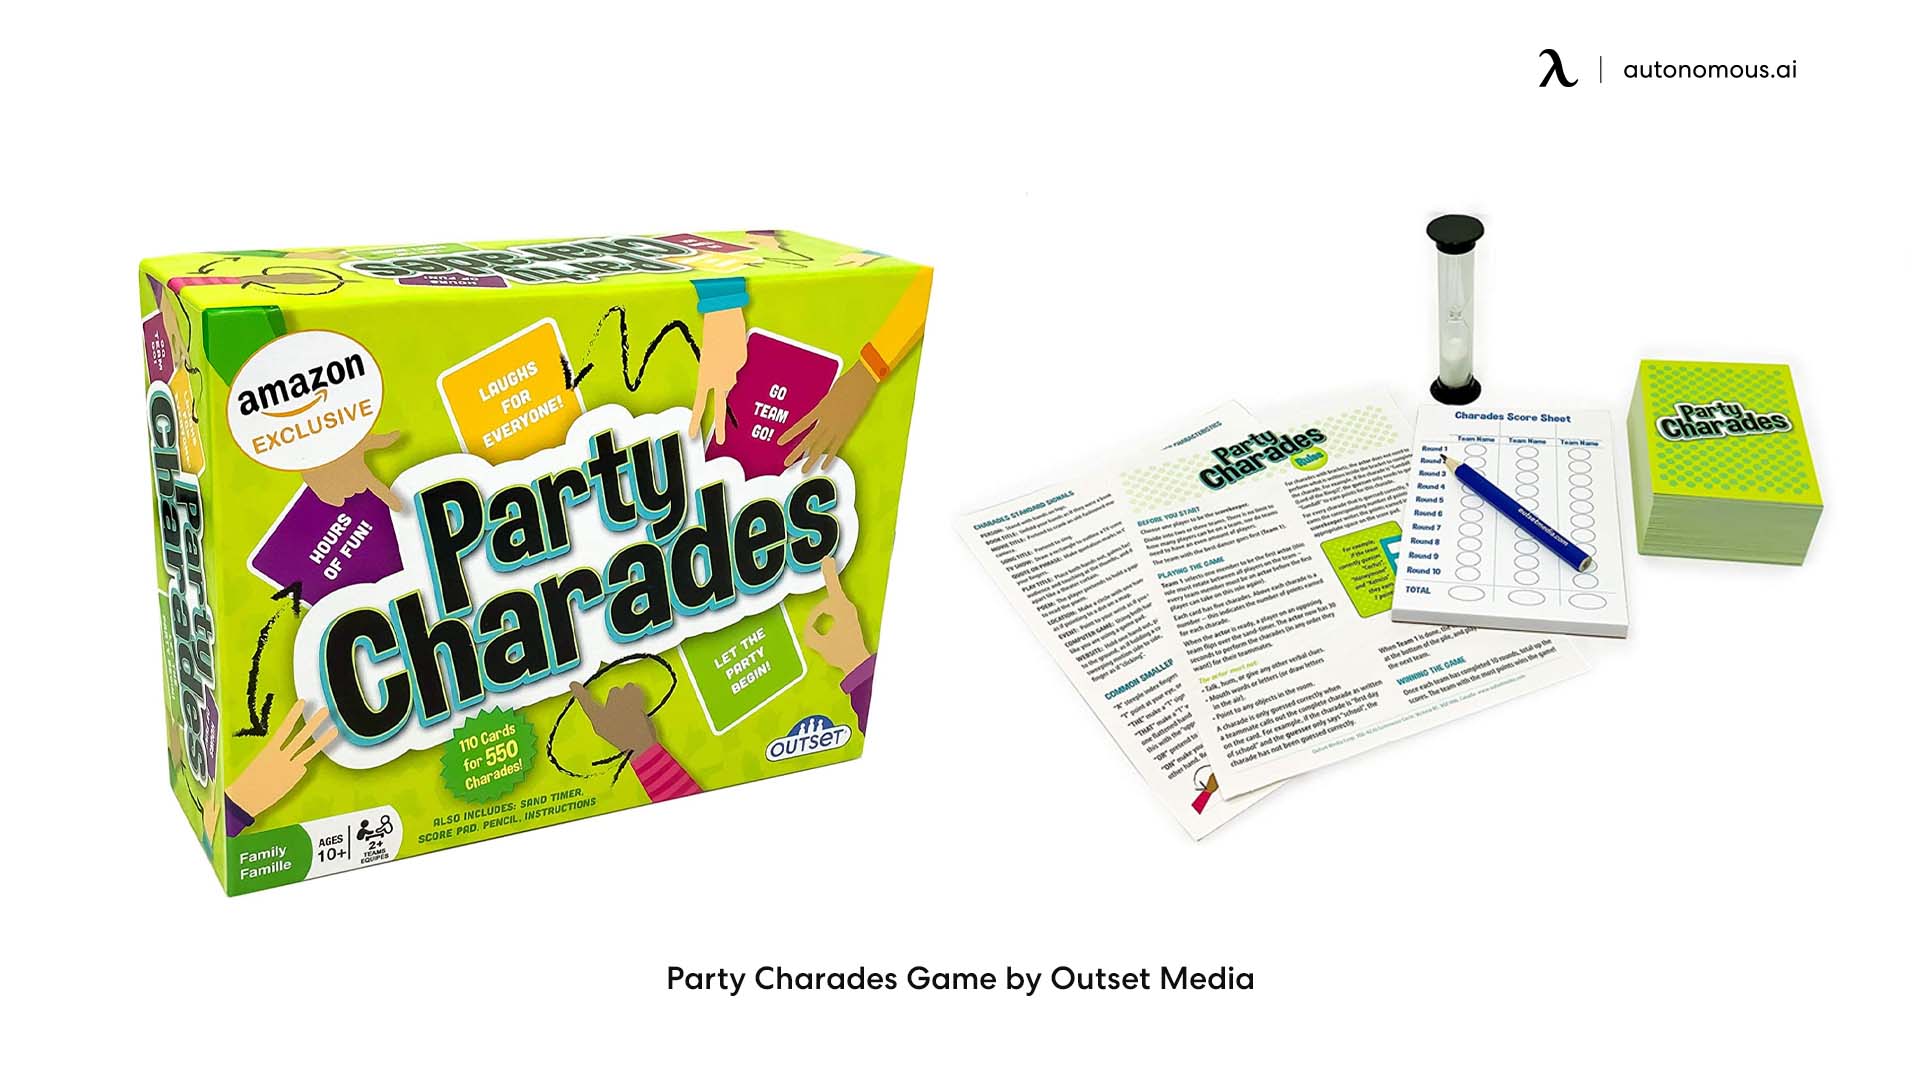 Charades is another coworker board game classic for many people's game nights